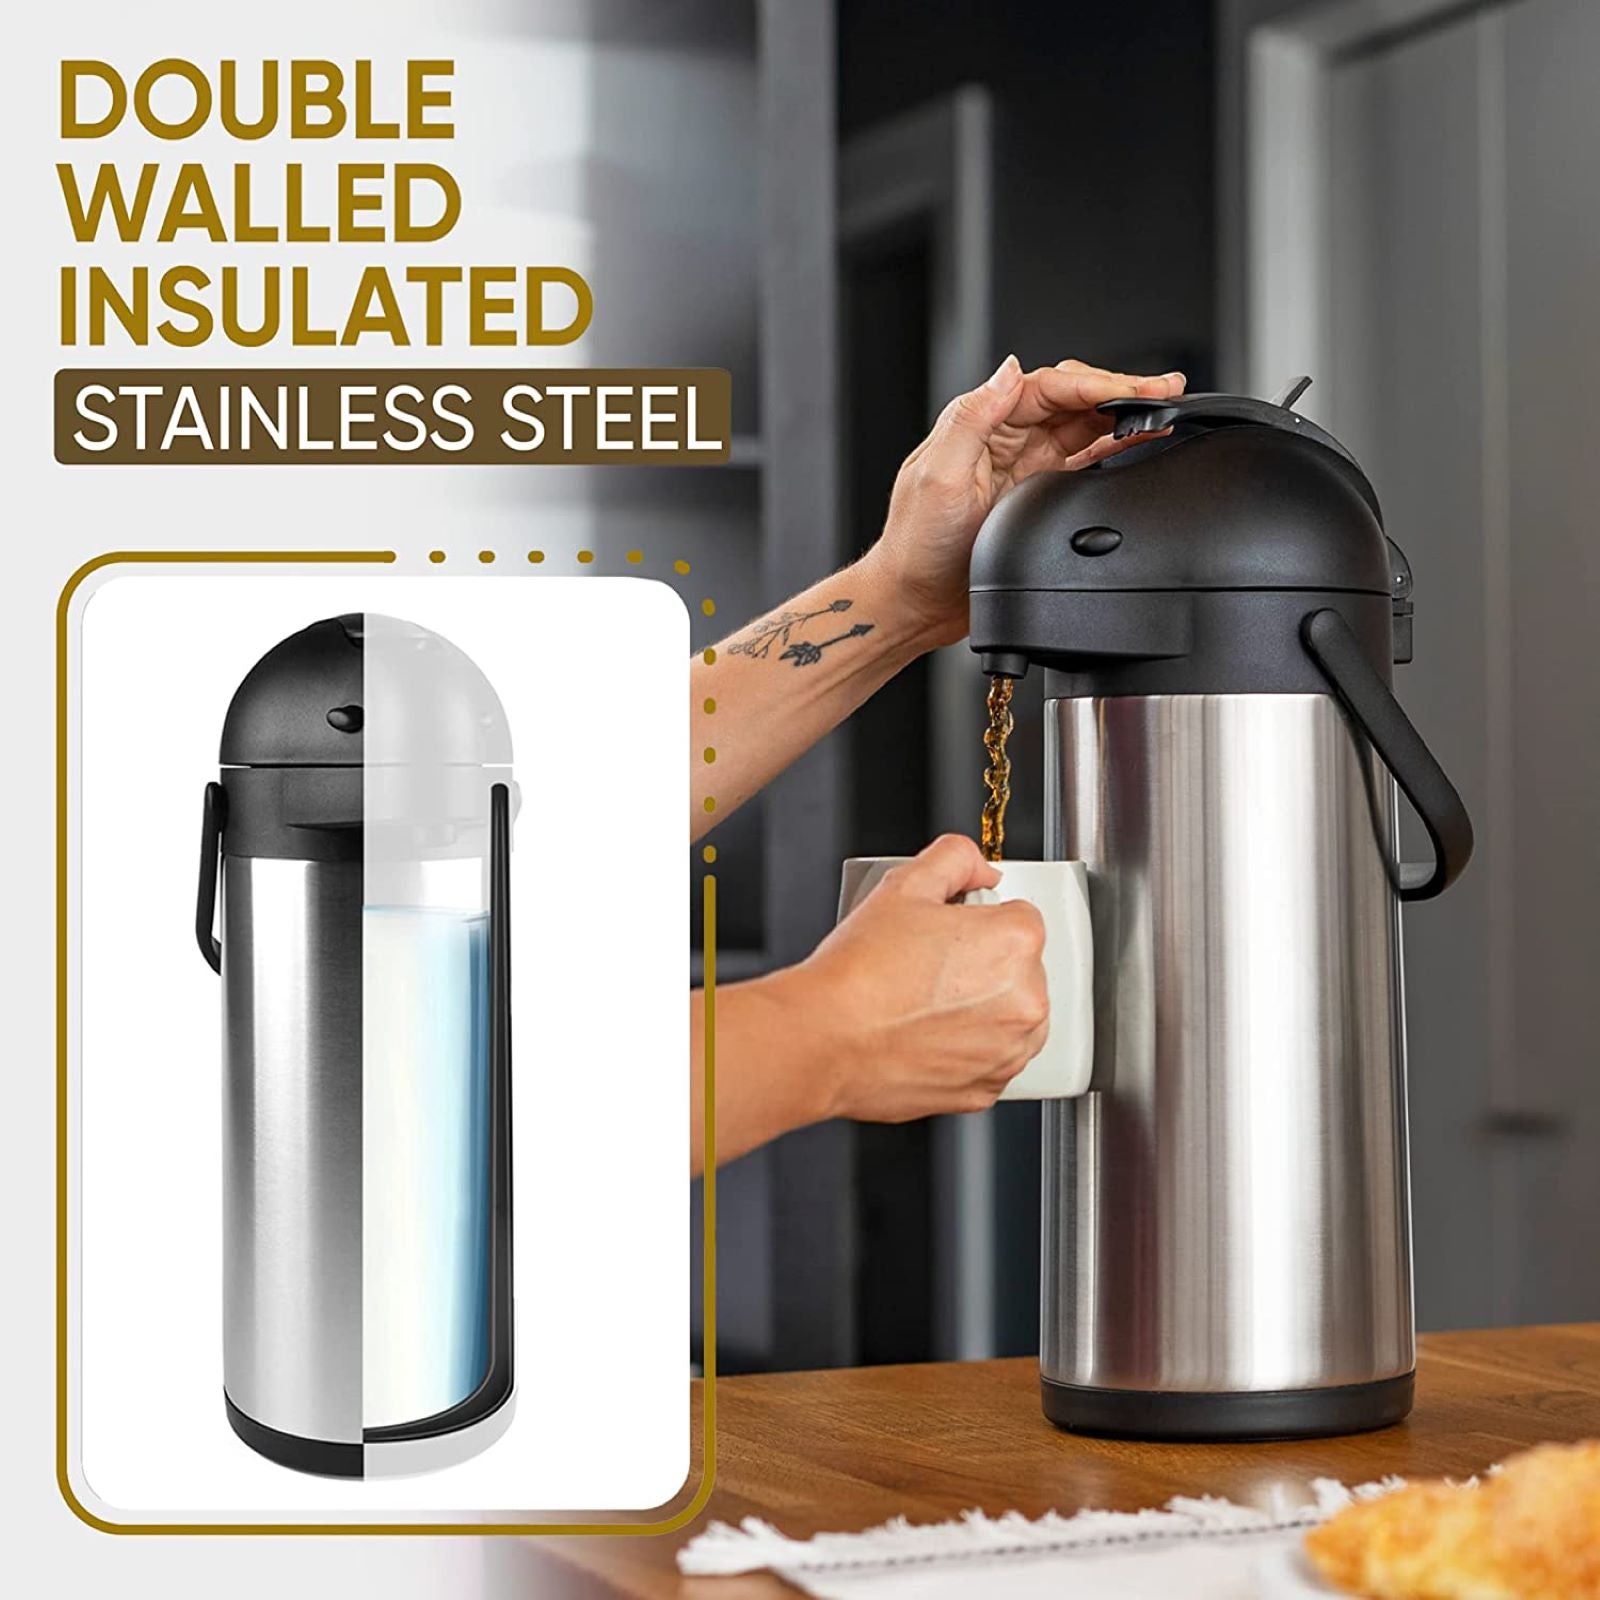 Insulated Thermal Hot and Cold Beverage Dispenser for Coffee/Hot